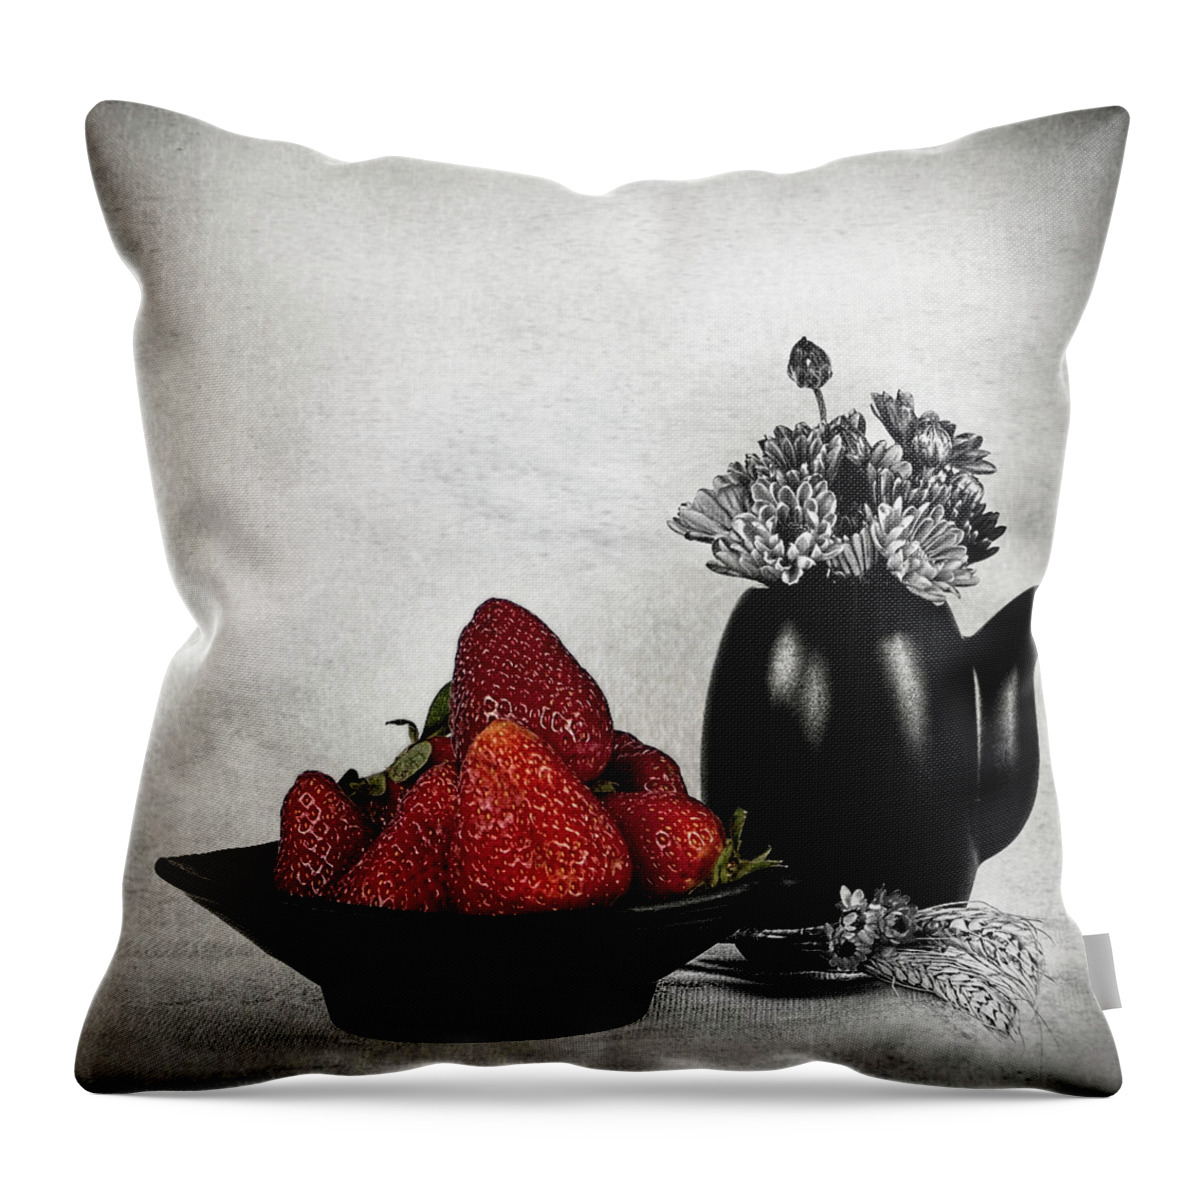 Vase Throw Pillow featuring the photograph Strawberries In Bowl by Rebeca Mello